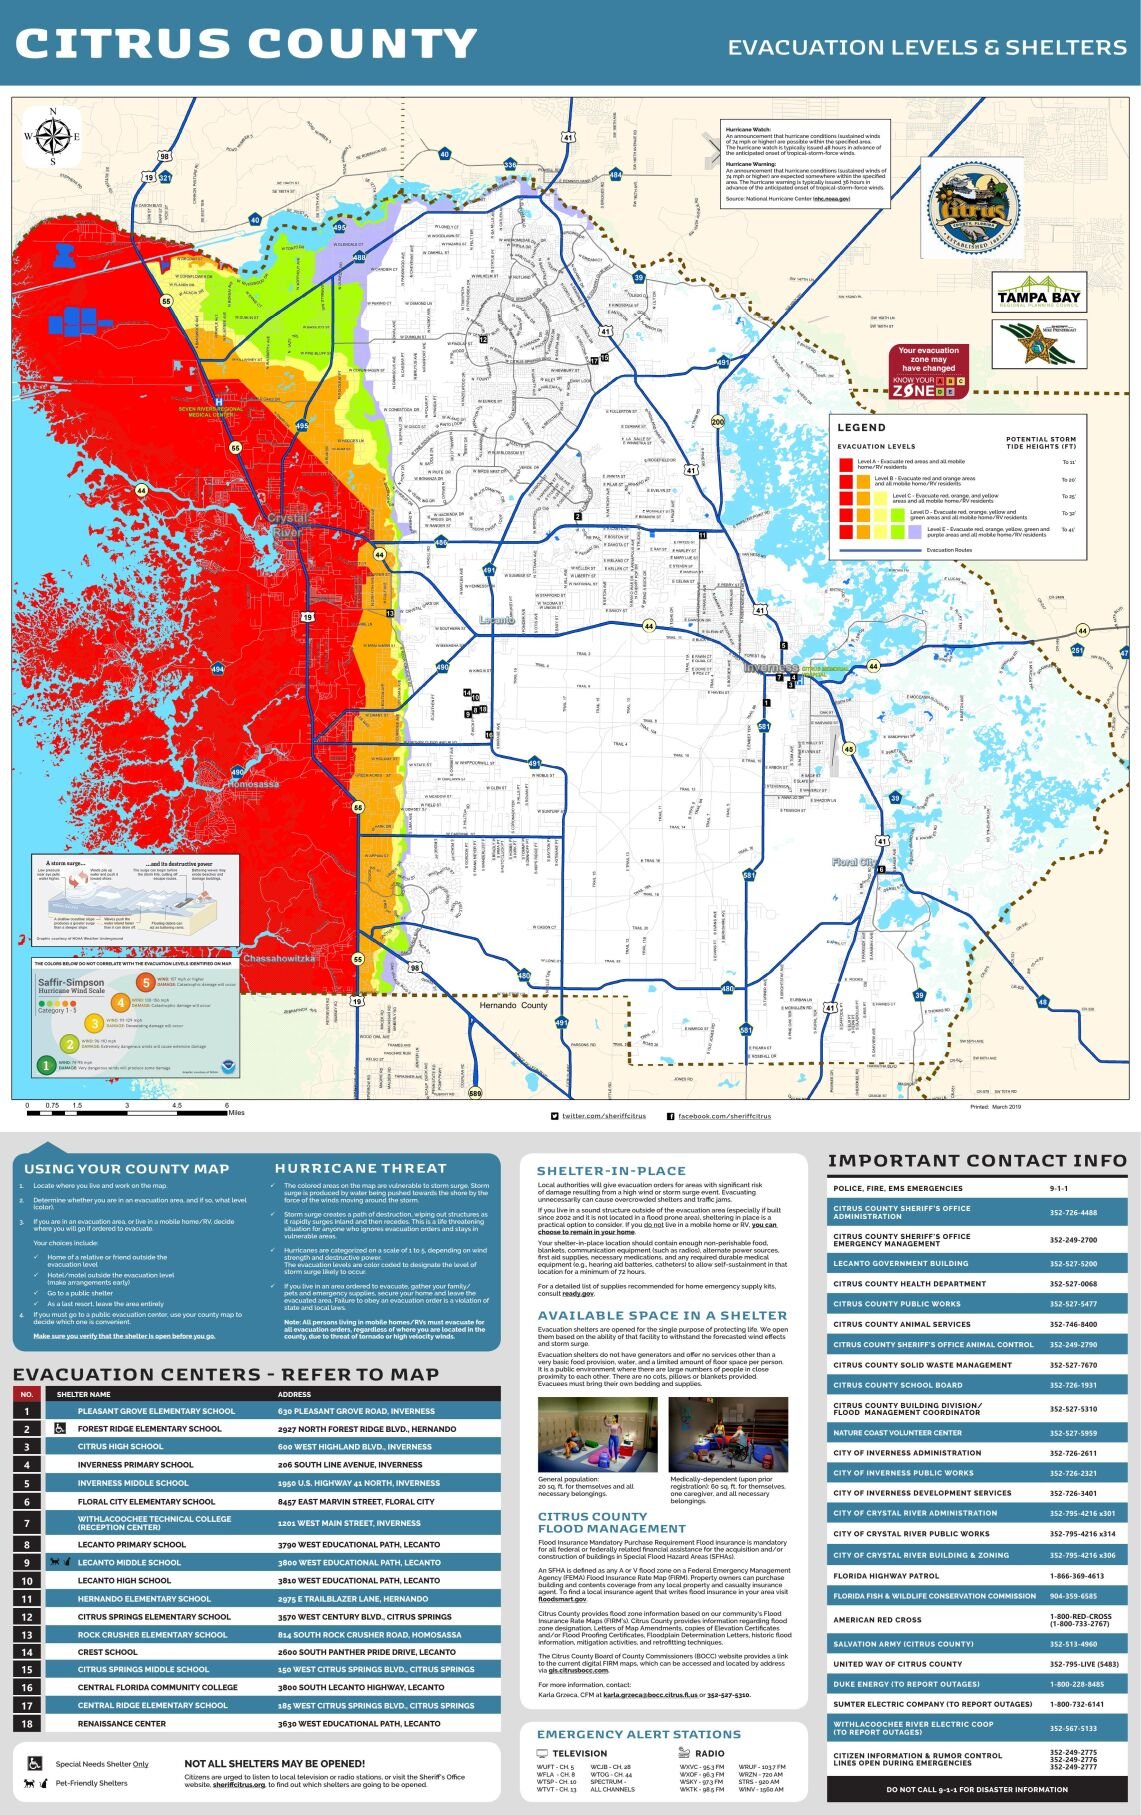 Mandatory evacuations issued for some areas in Citrus Hurricane Guide chronicleonline